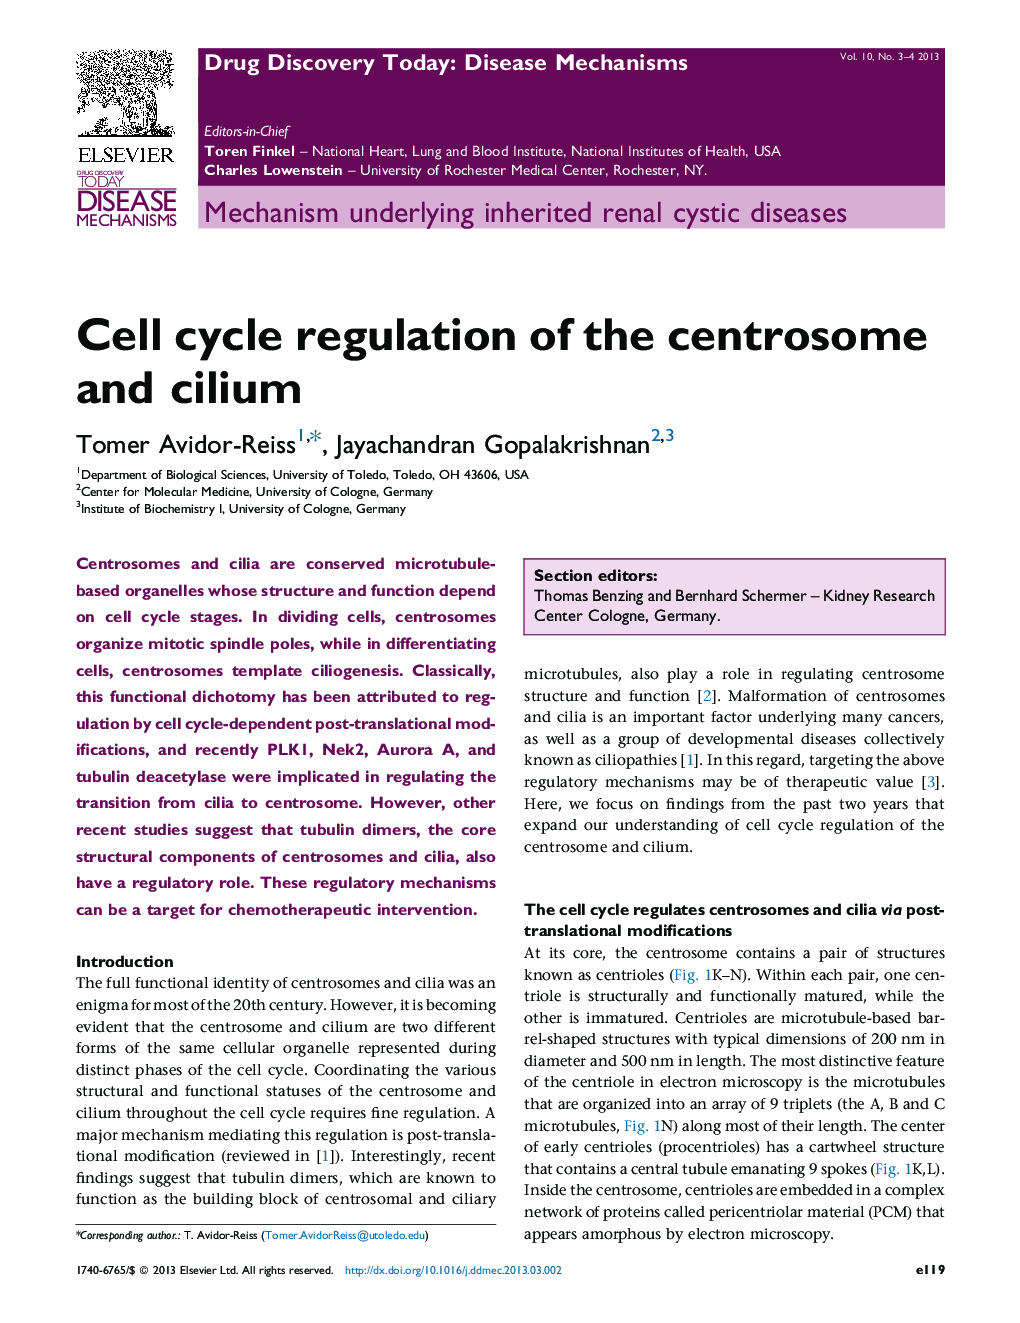 Cell cycle regulation of the centrosome and cilium